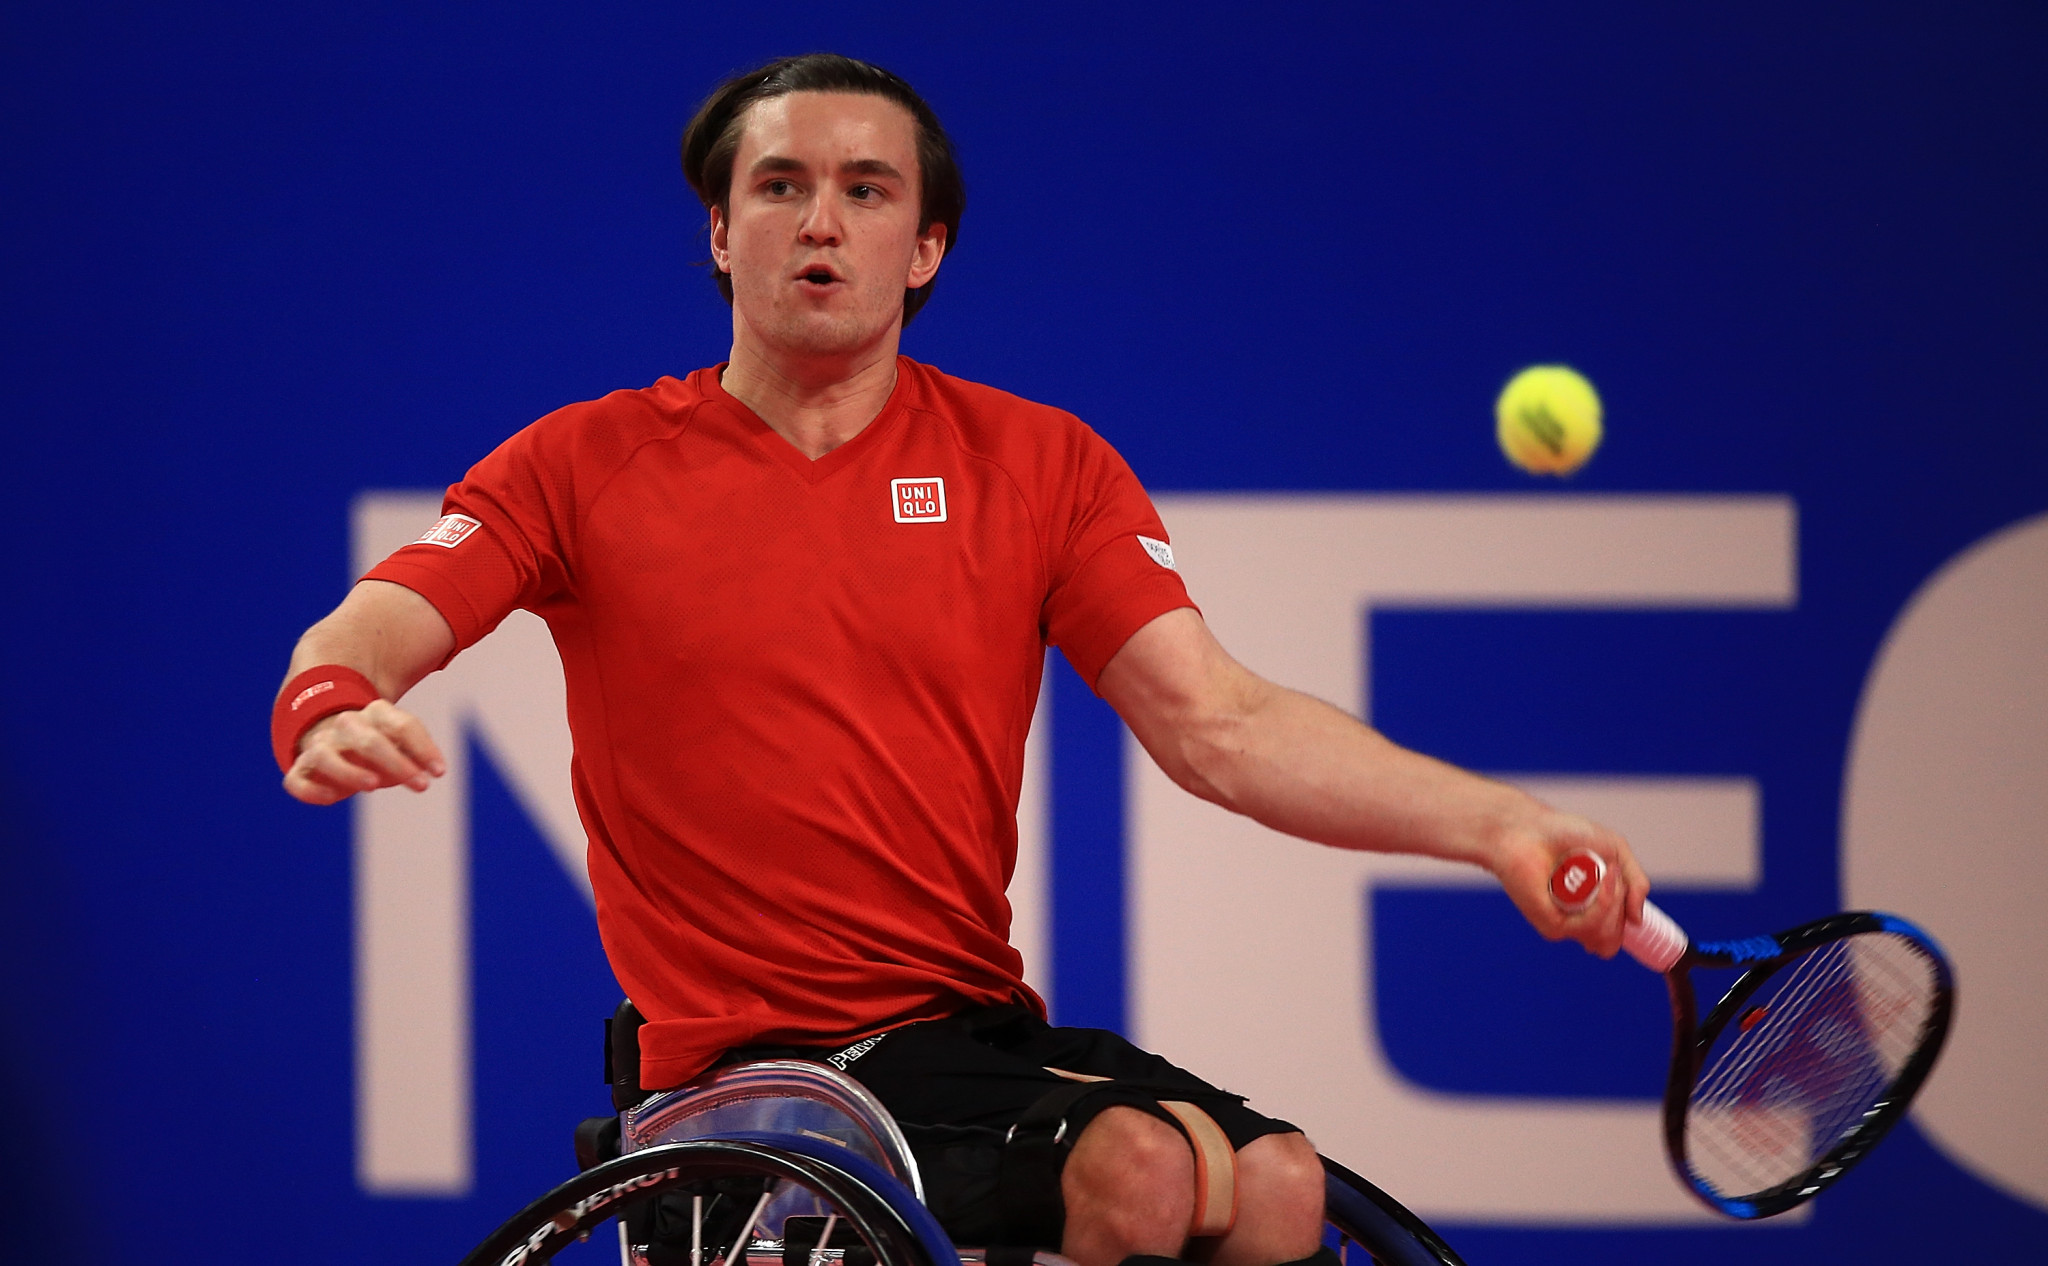 ITF cancels Wheelchair Tennis Masters due to COVID-19 pandemic